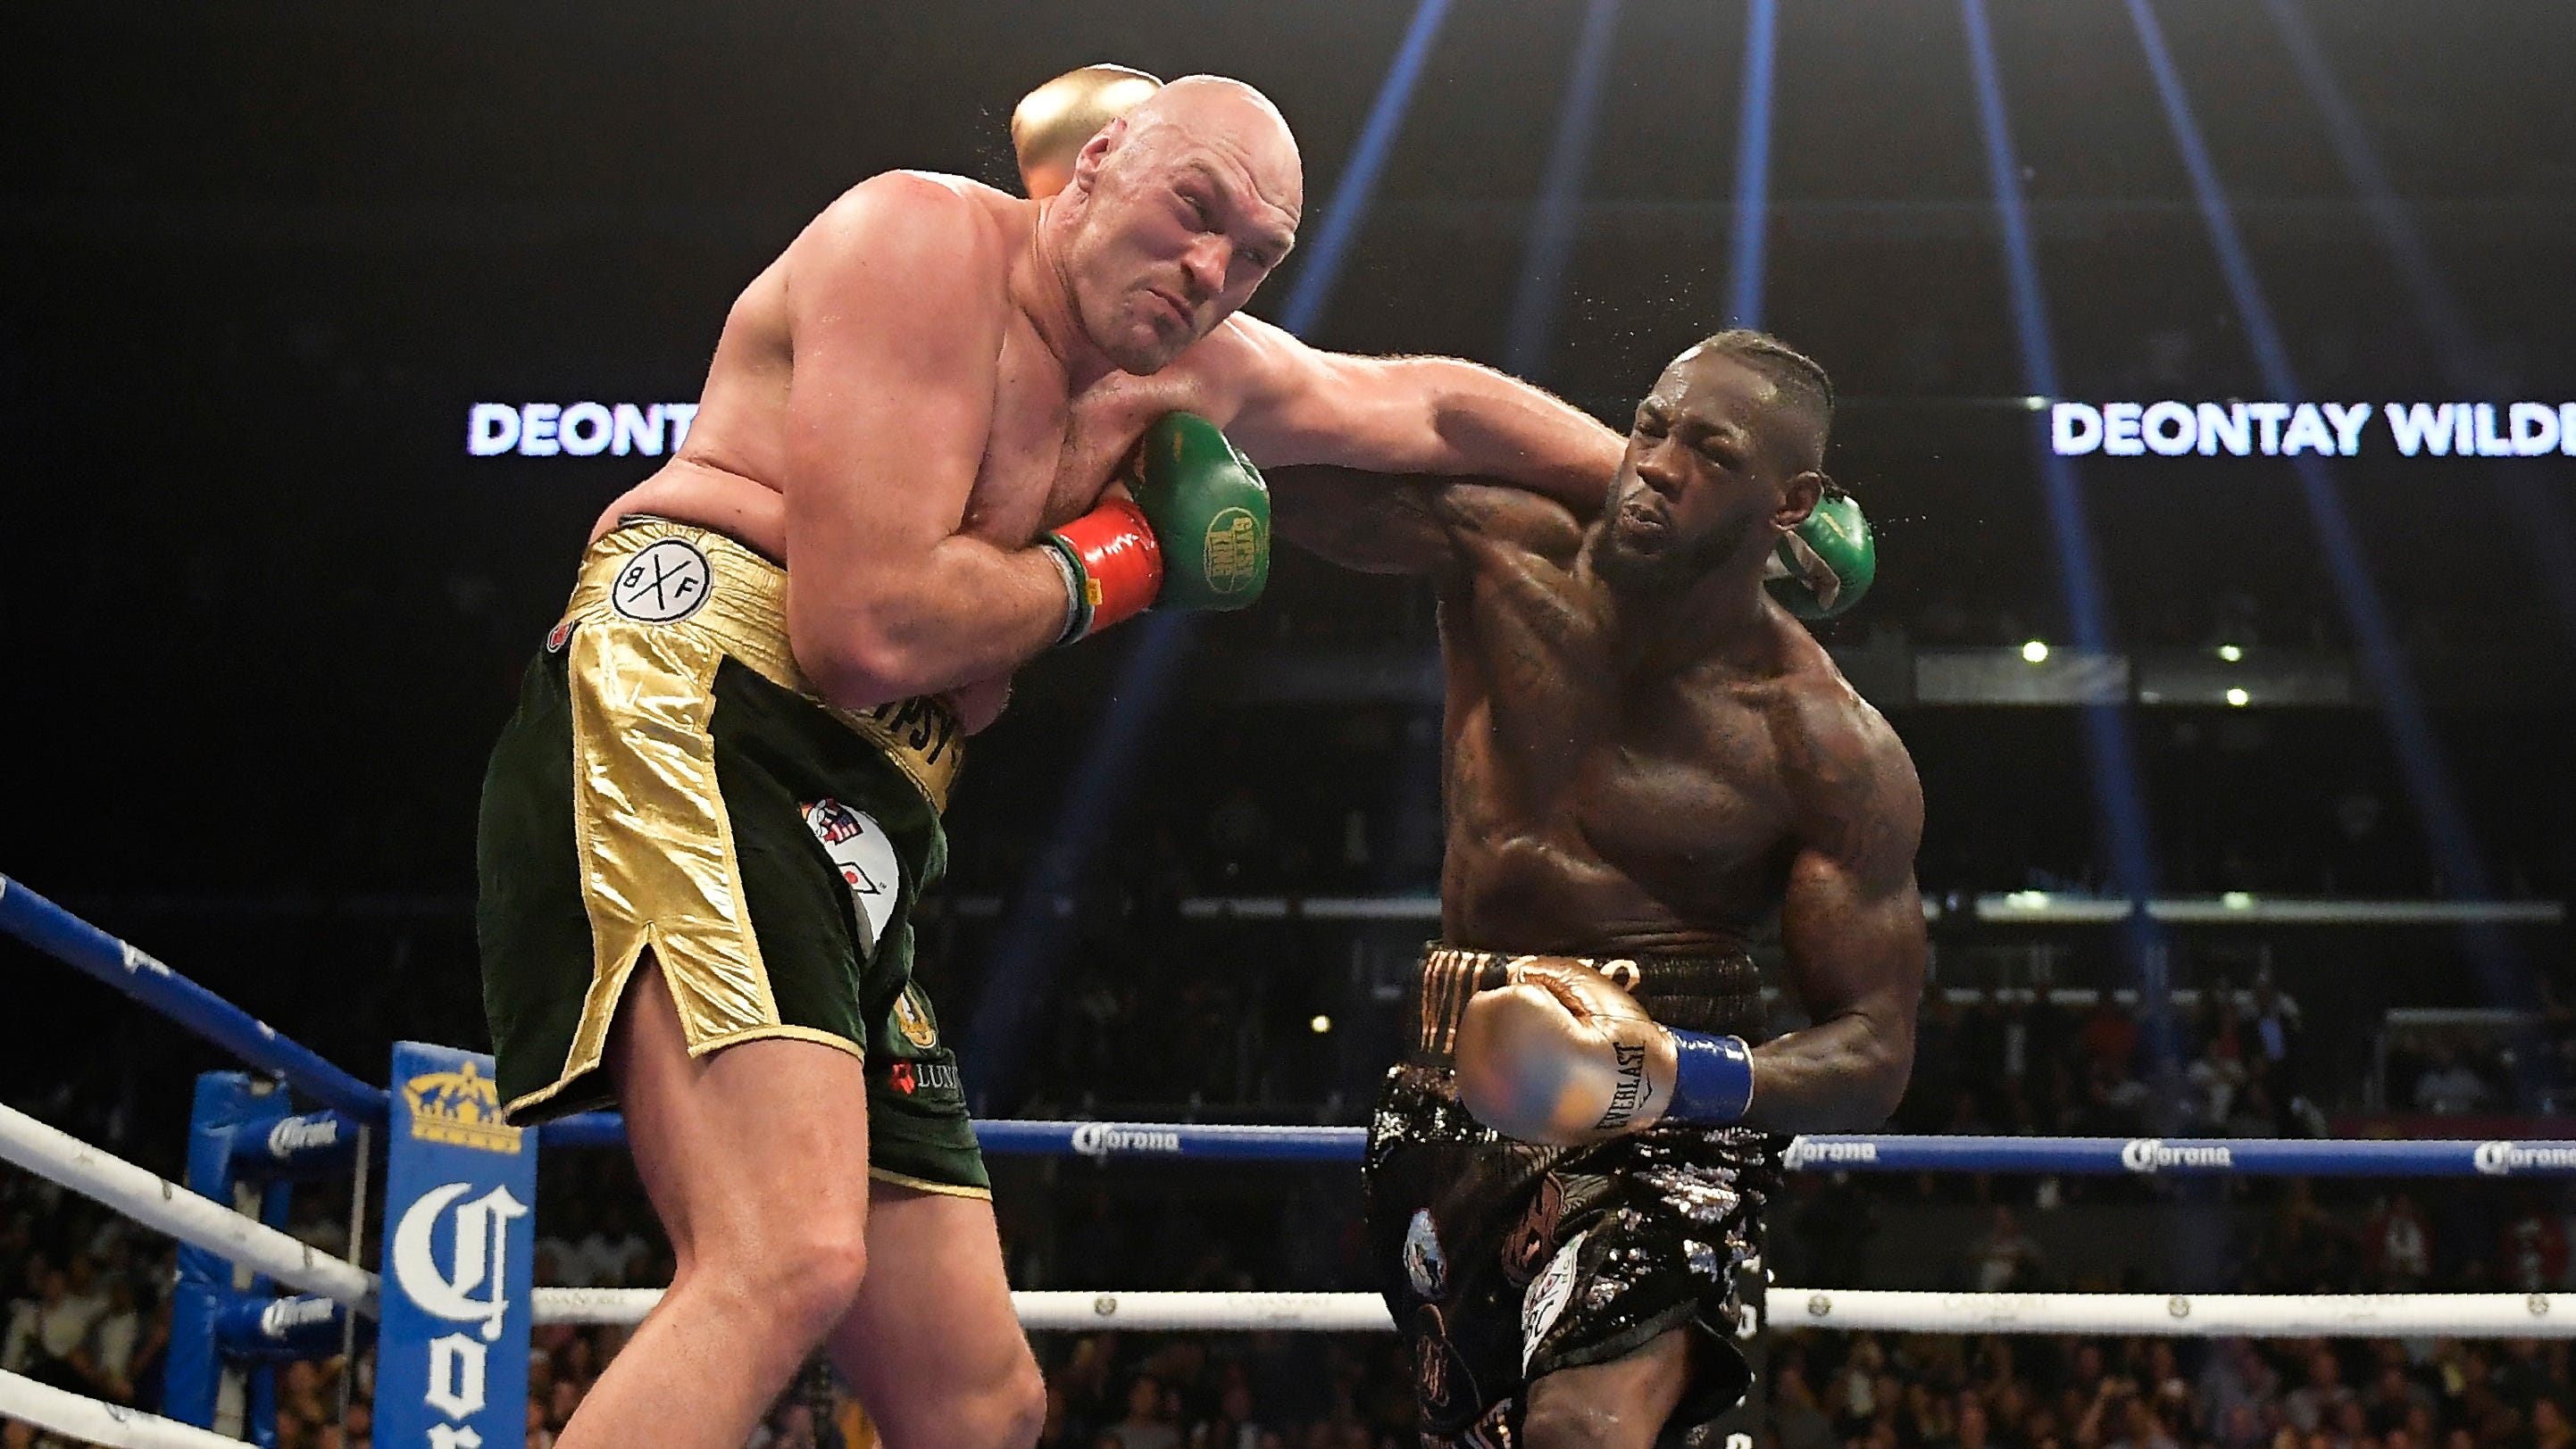 Deontay Wilder, Tyson Fury fight to controversial draw in title bout